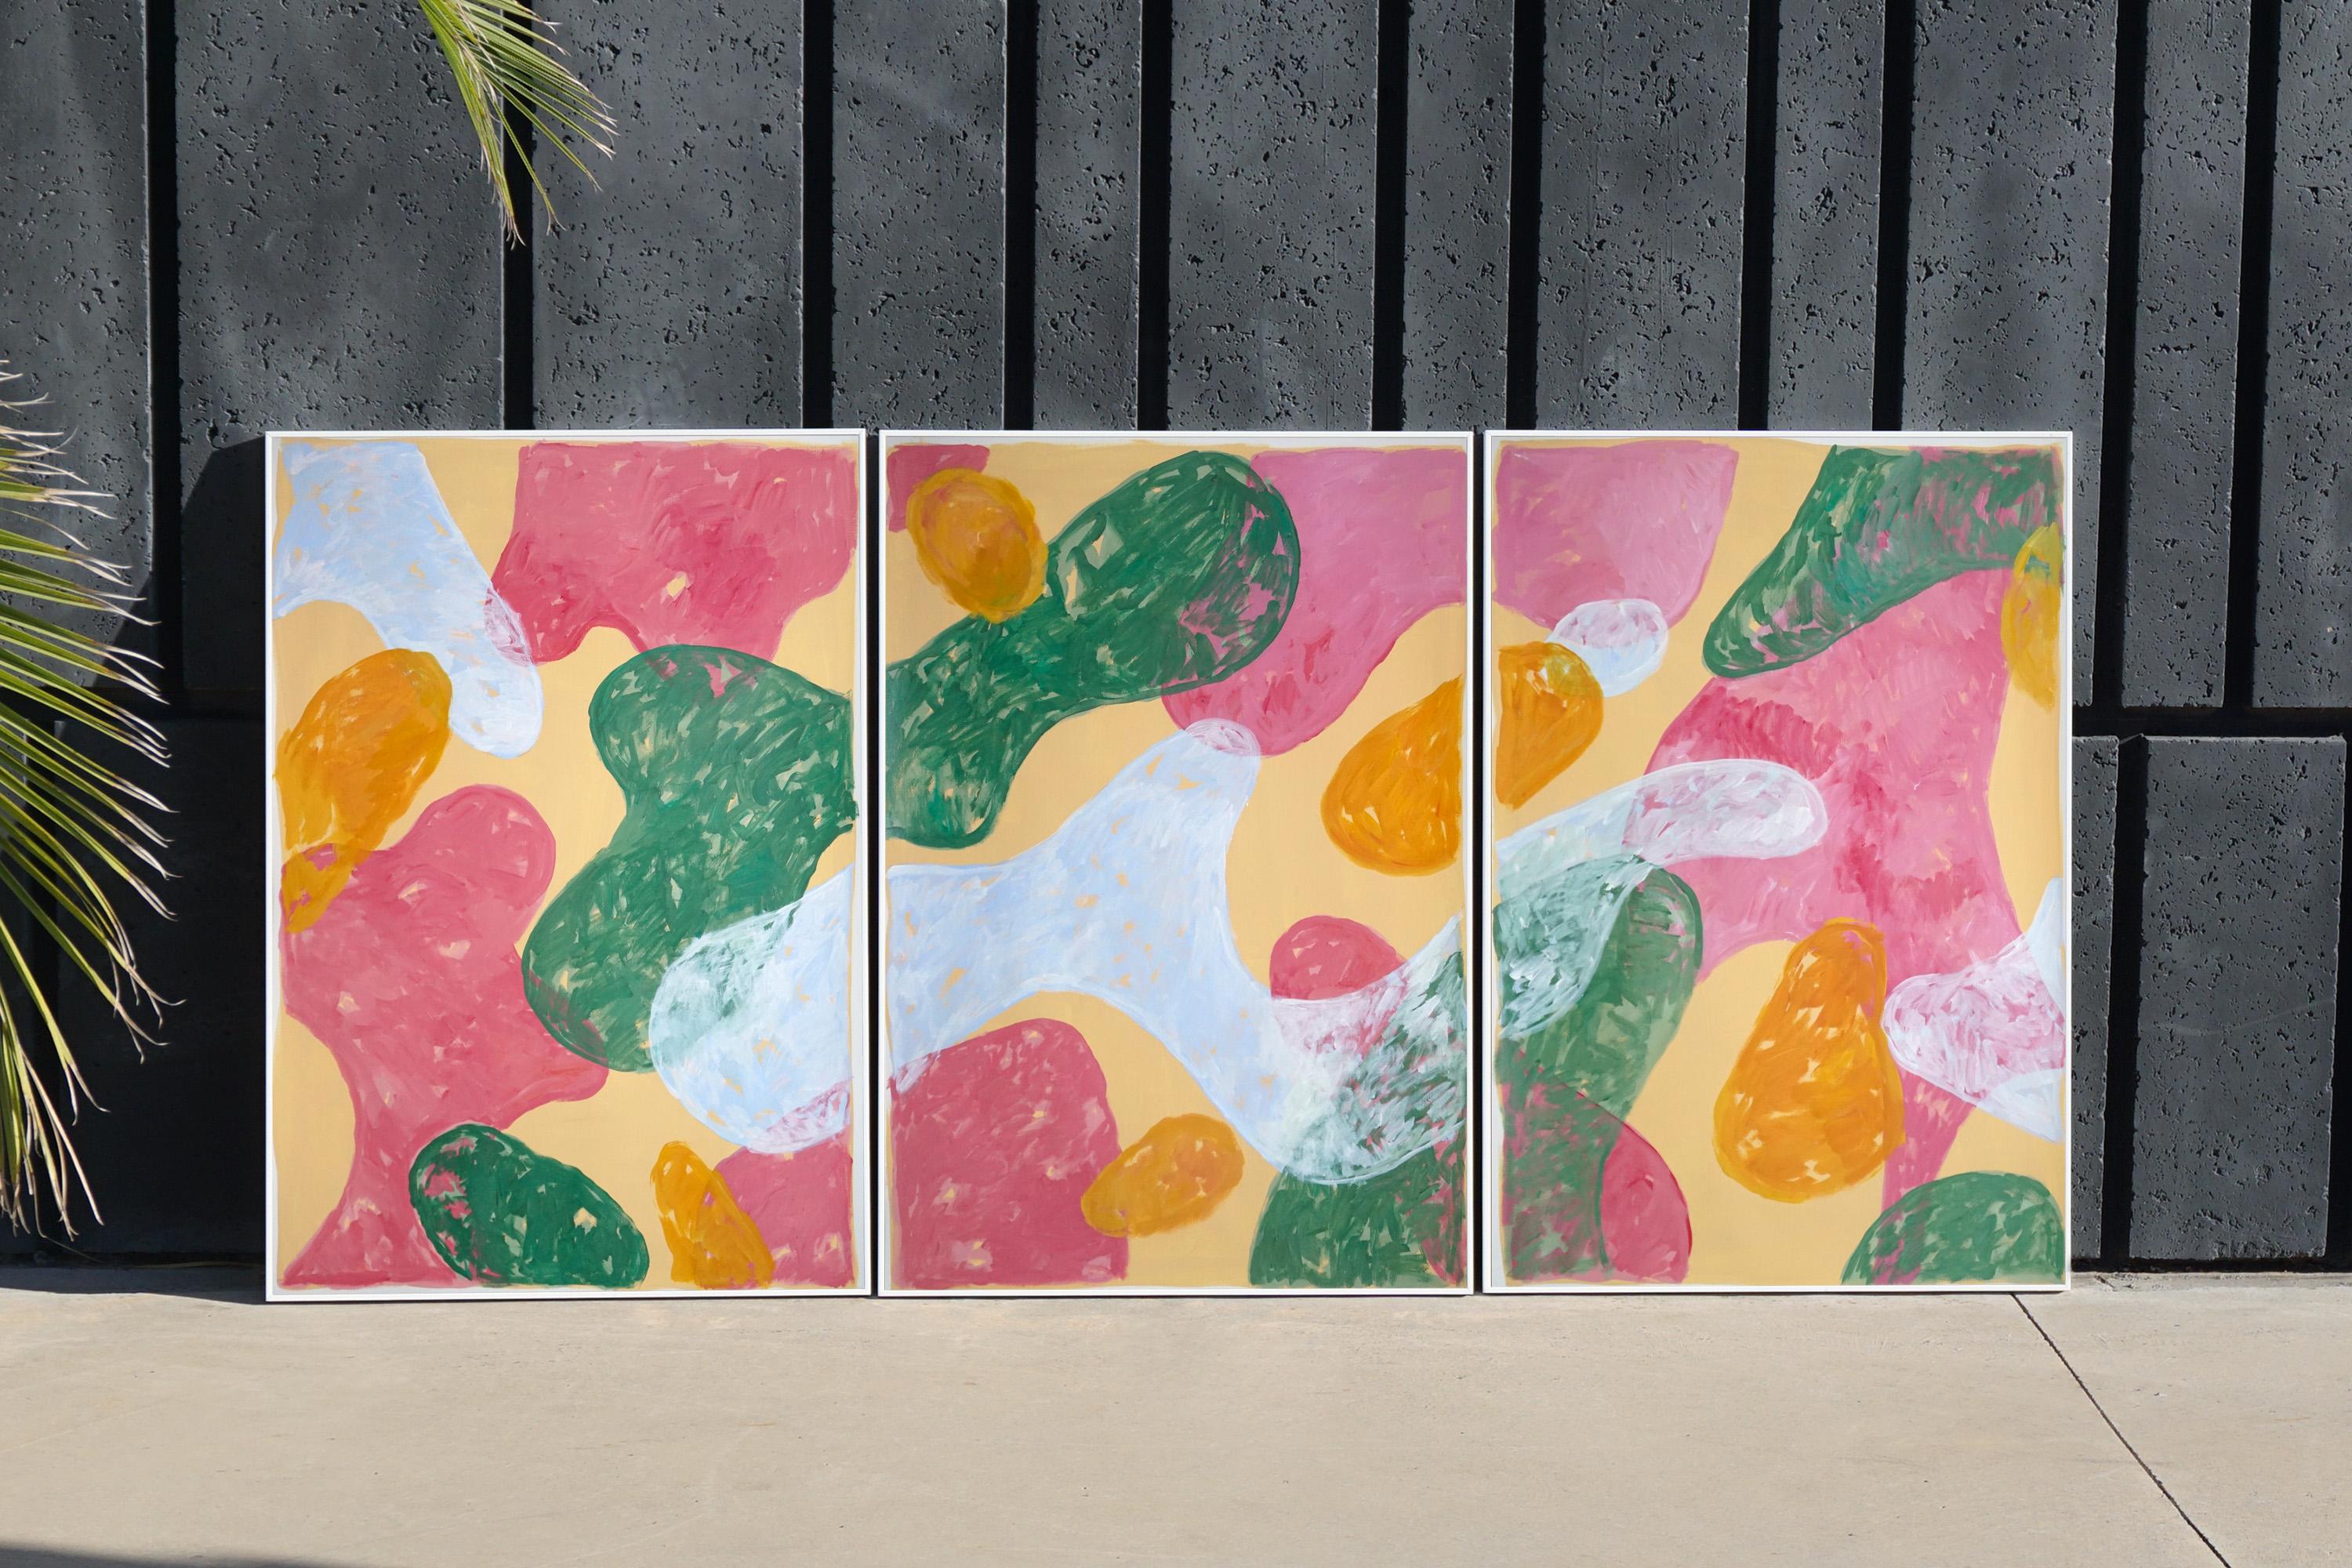 Abstract Botanical Triptych,  Pink, Green, Large Pastel Flourish Shapes on Beige - Painting by Natalia Roman